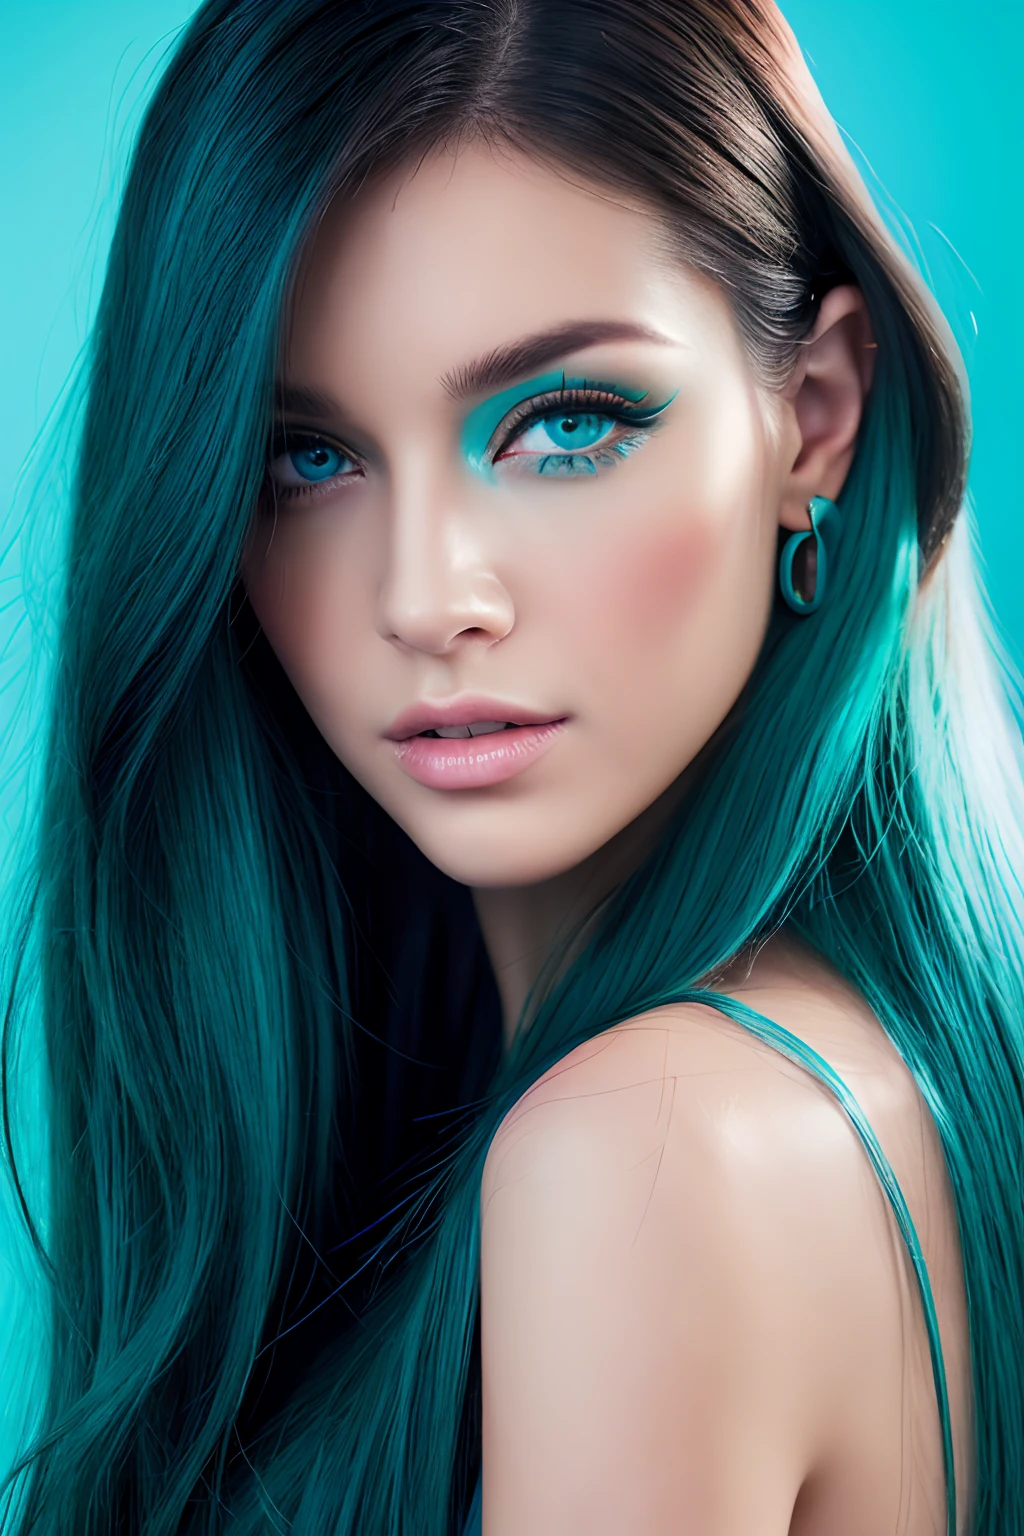 Realistic Woman、Face model Barbara Palvin、Eye color is blue、All hair is turquoise blue、Longhaire、Full image qualityＨＤ、Background color is black